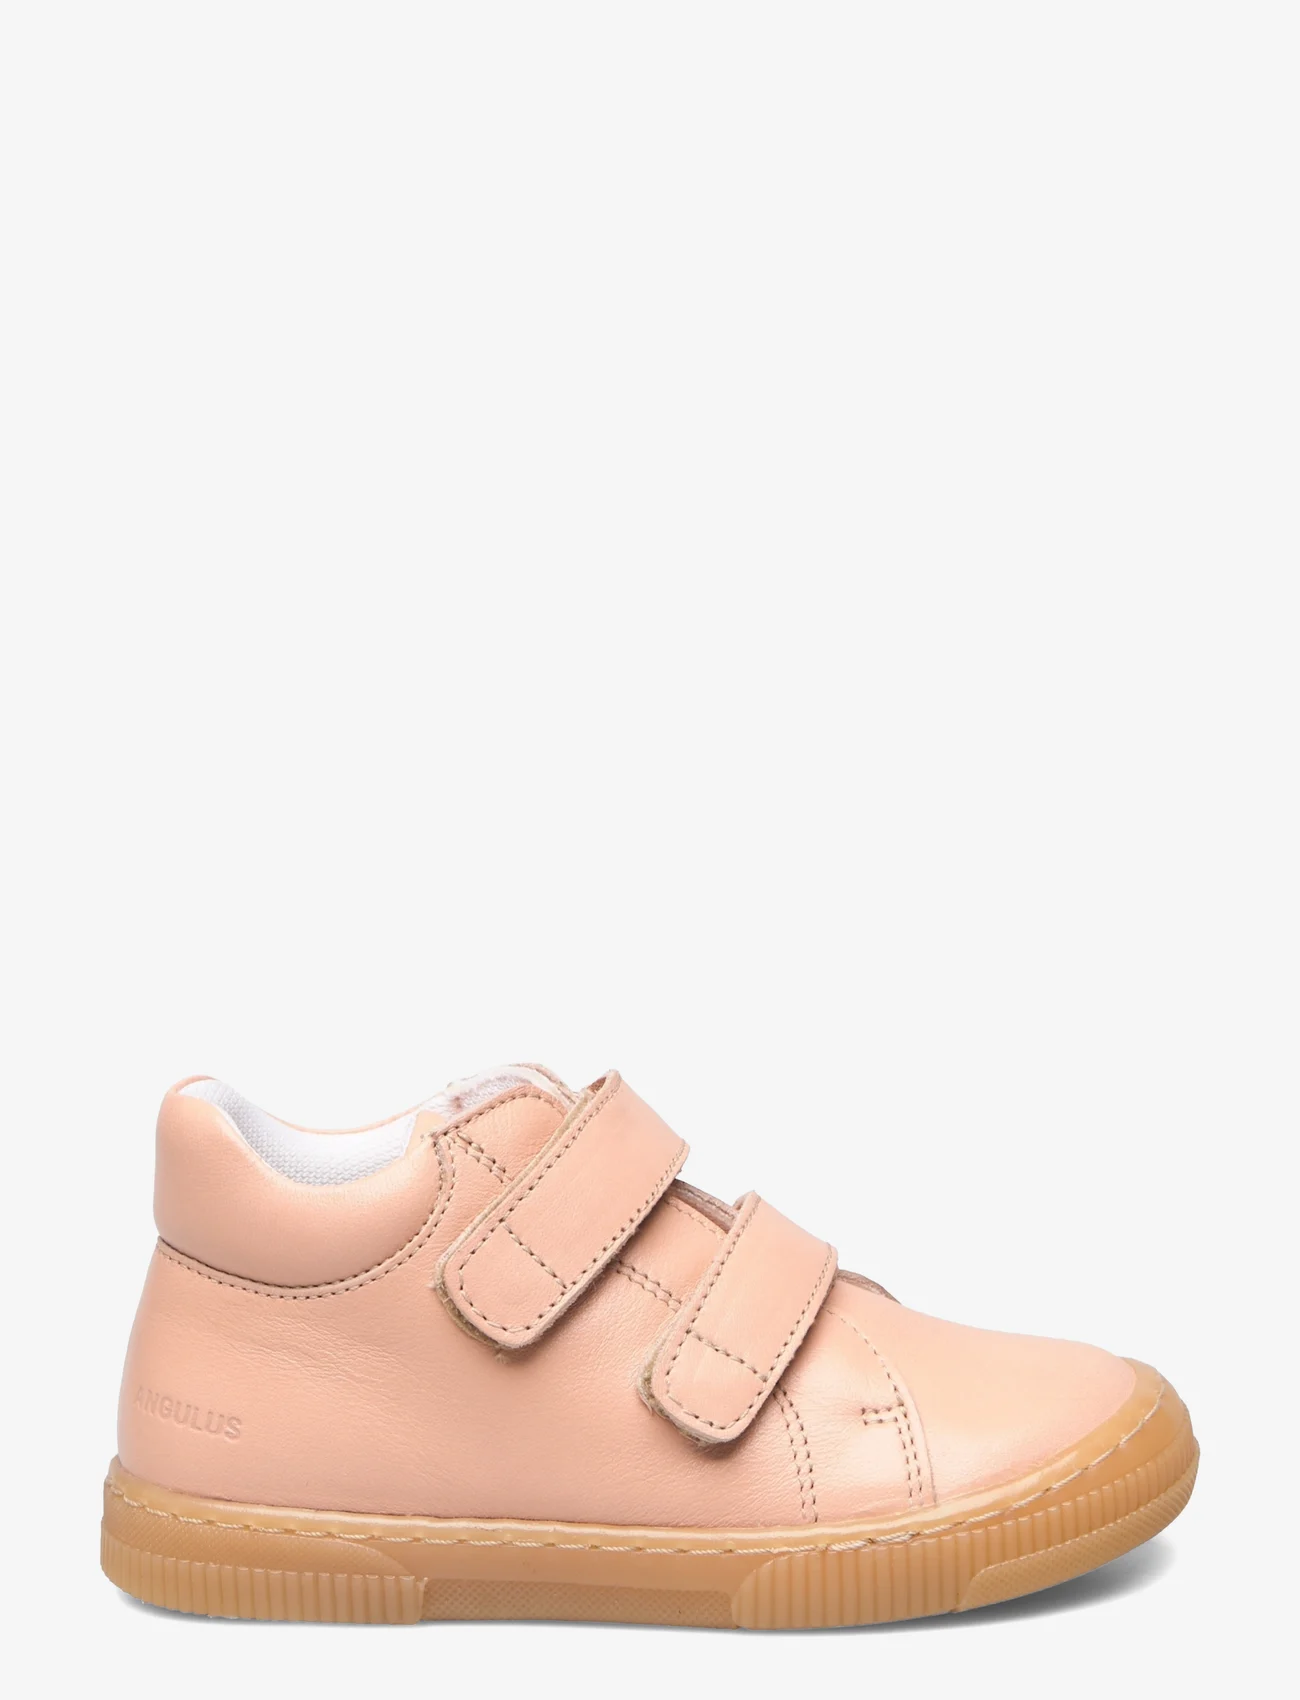 ANGULUS - Shoes - flat - with lace - sommerschnäppchen - 1471 peach - 1